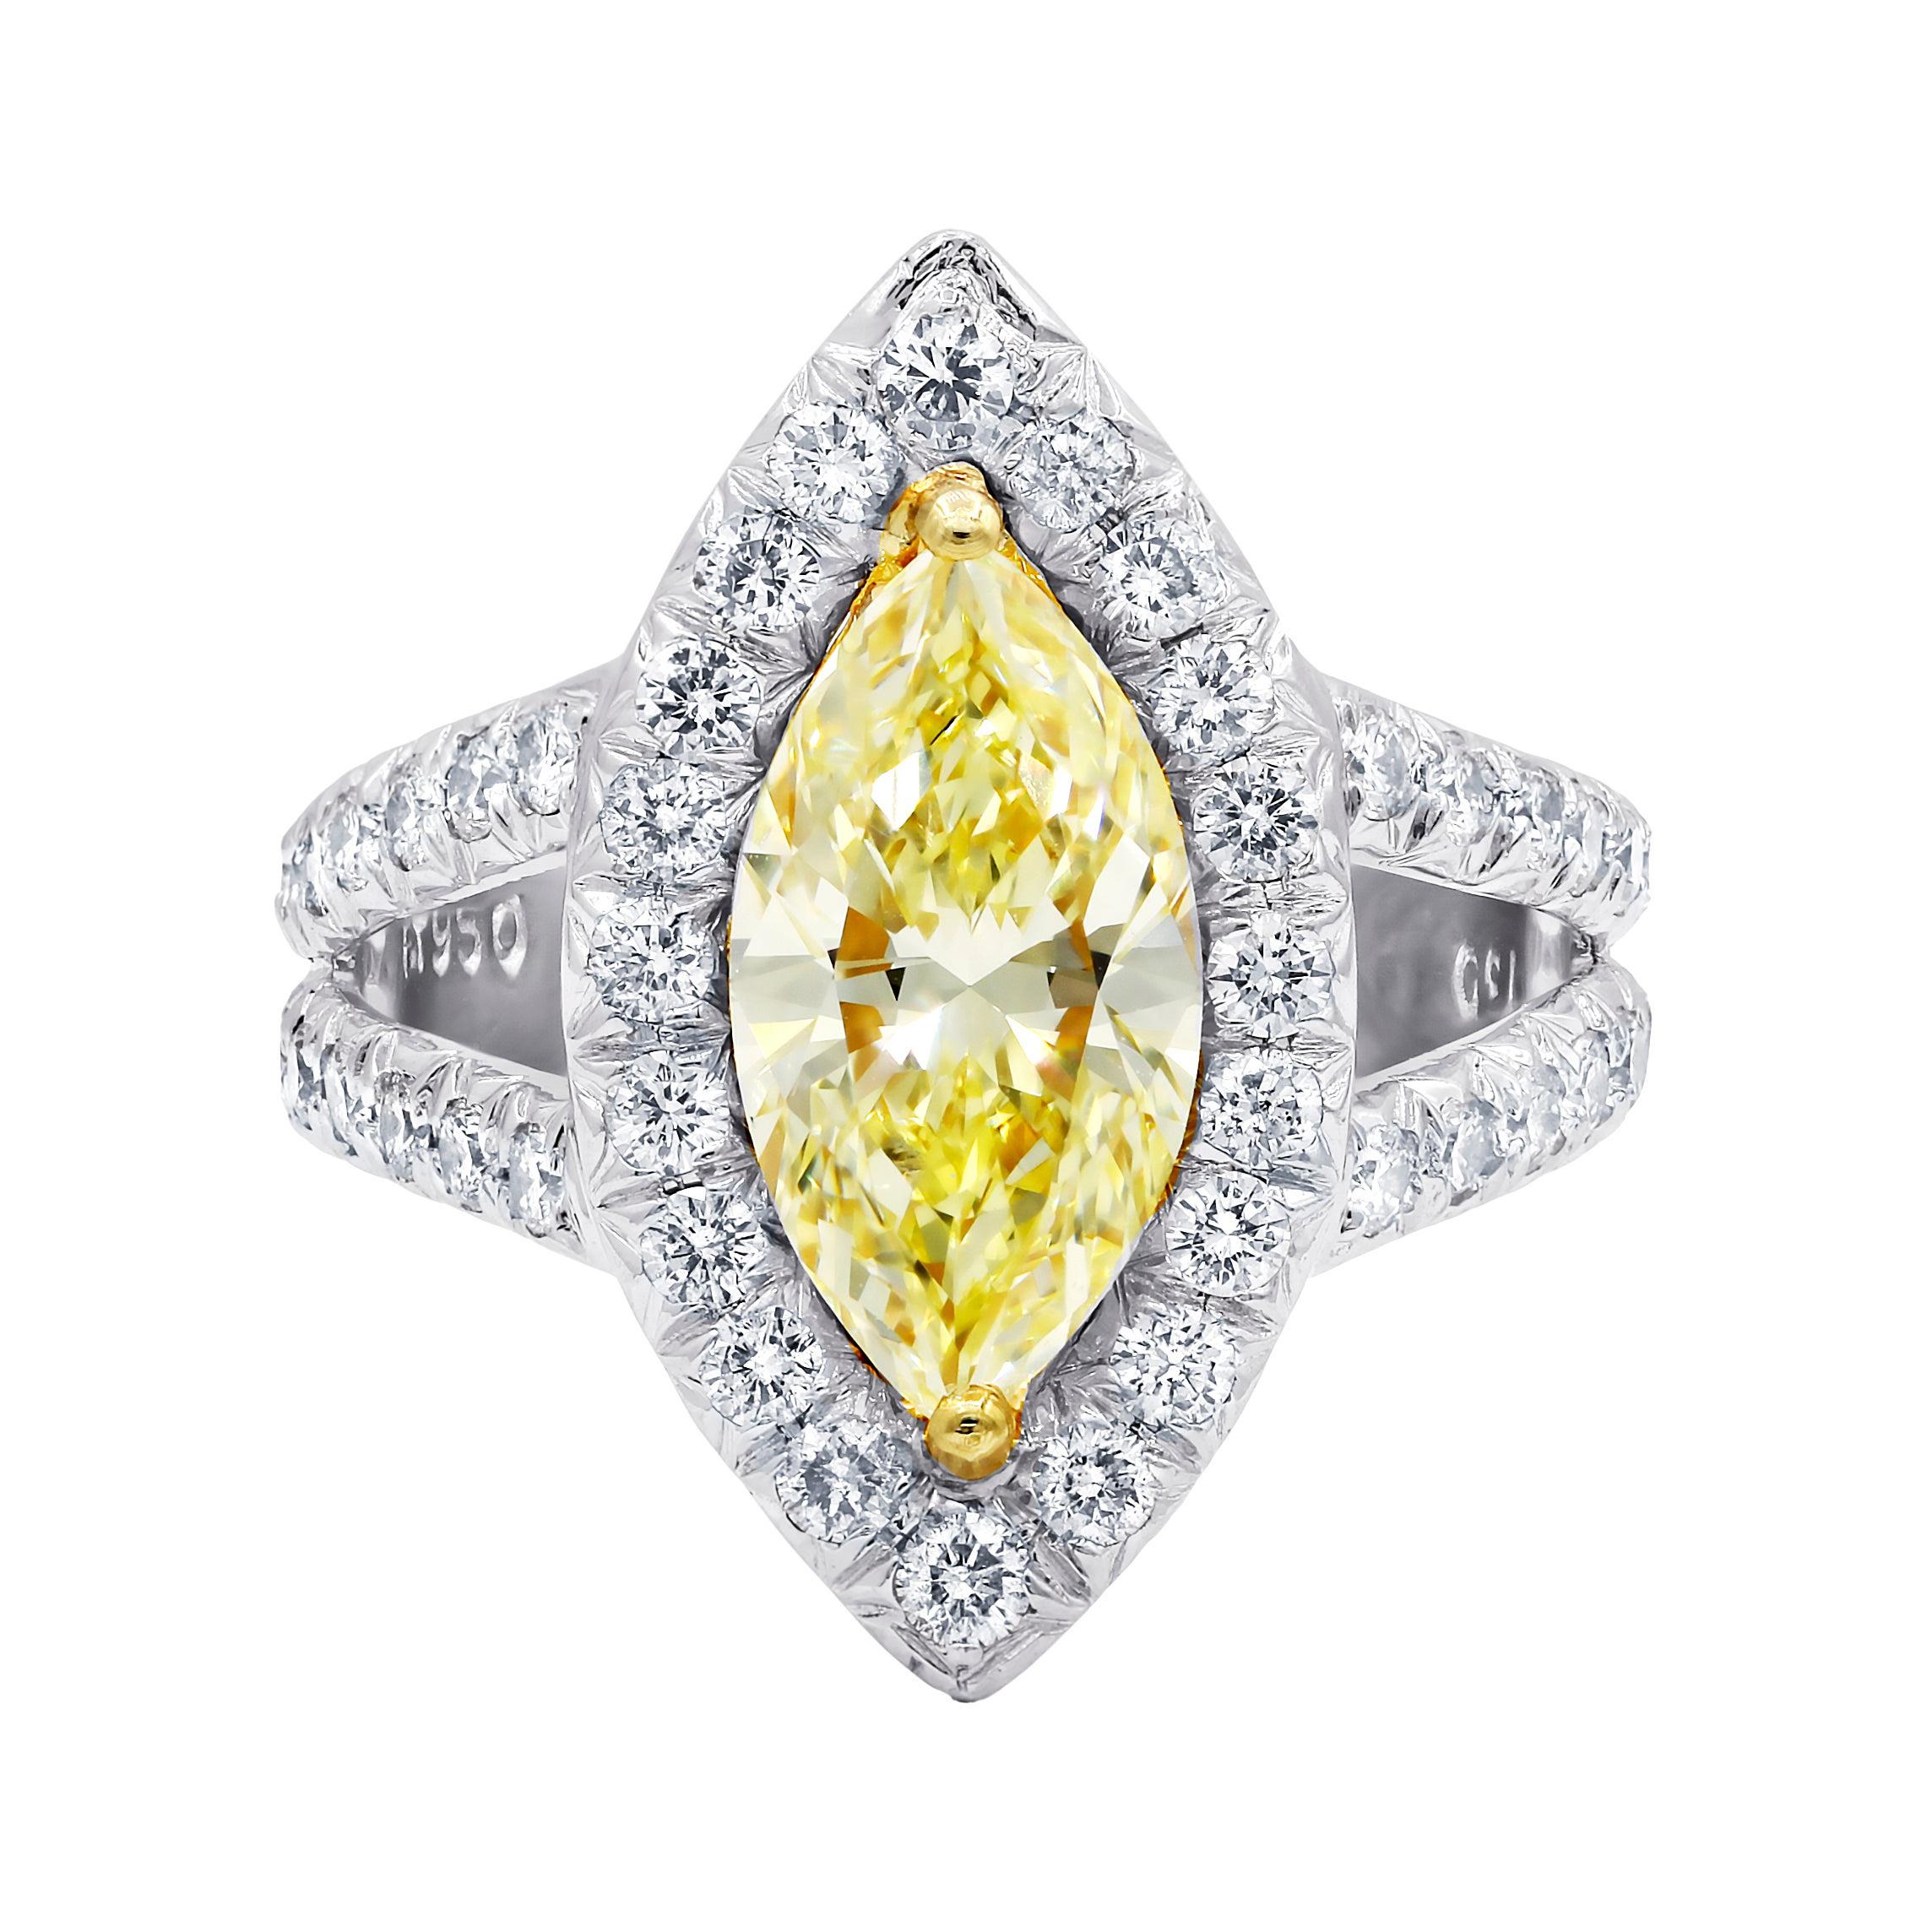 Platinum and 18kt Diamond Engagement Ring with Fancy Yellow